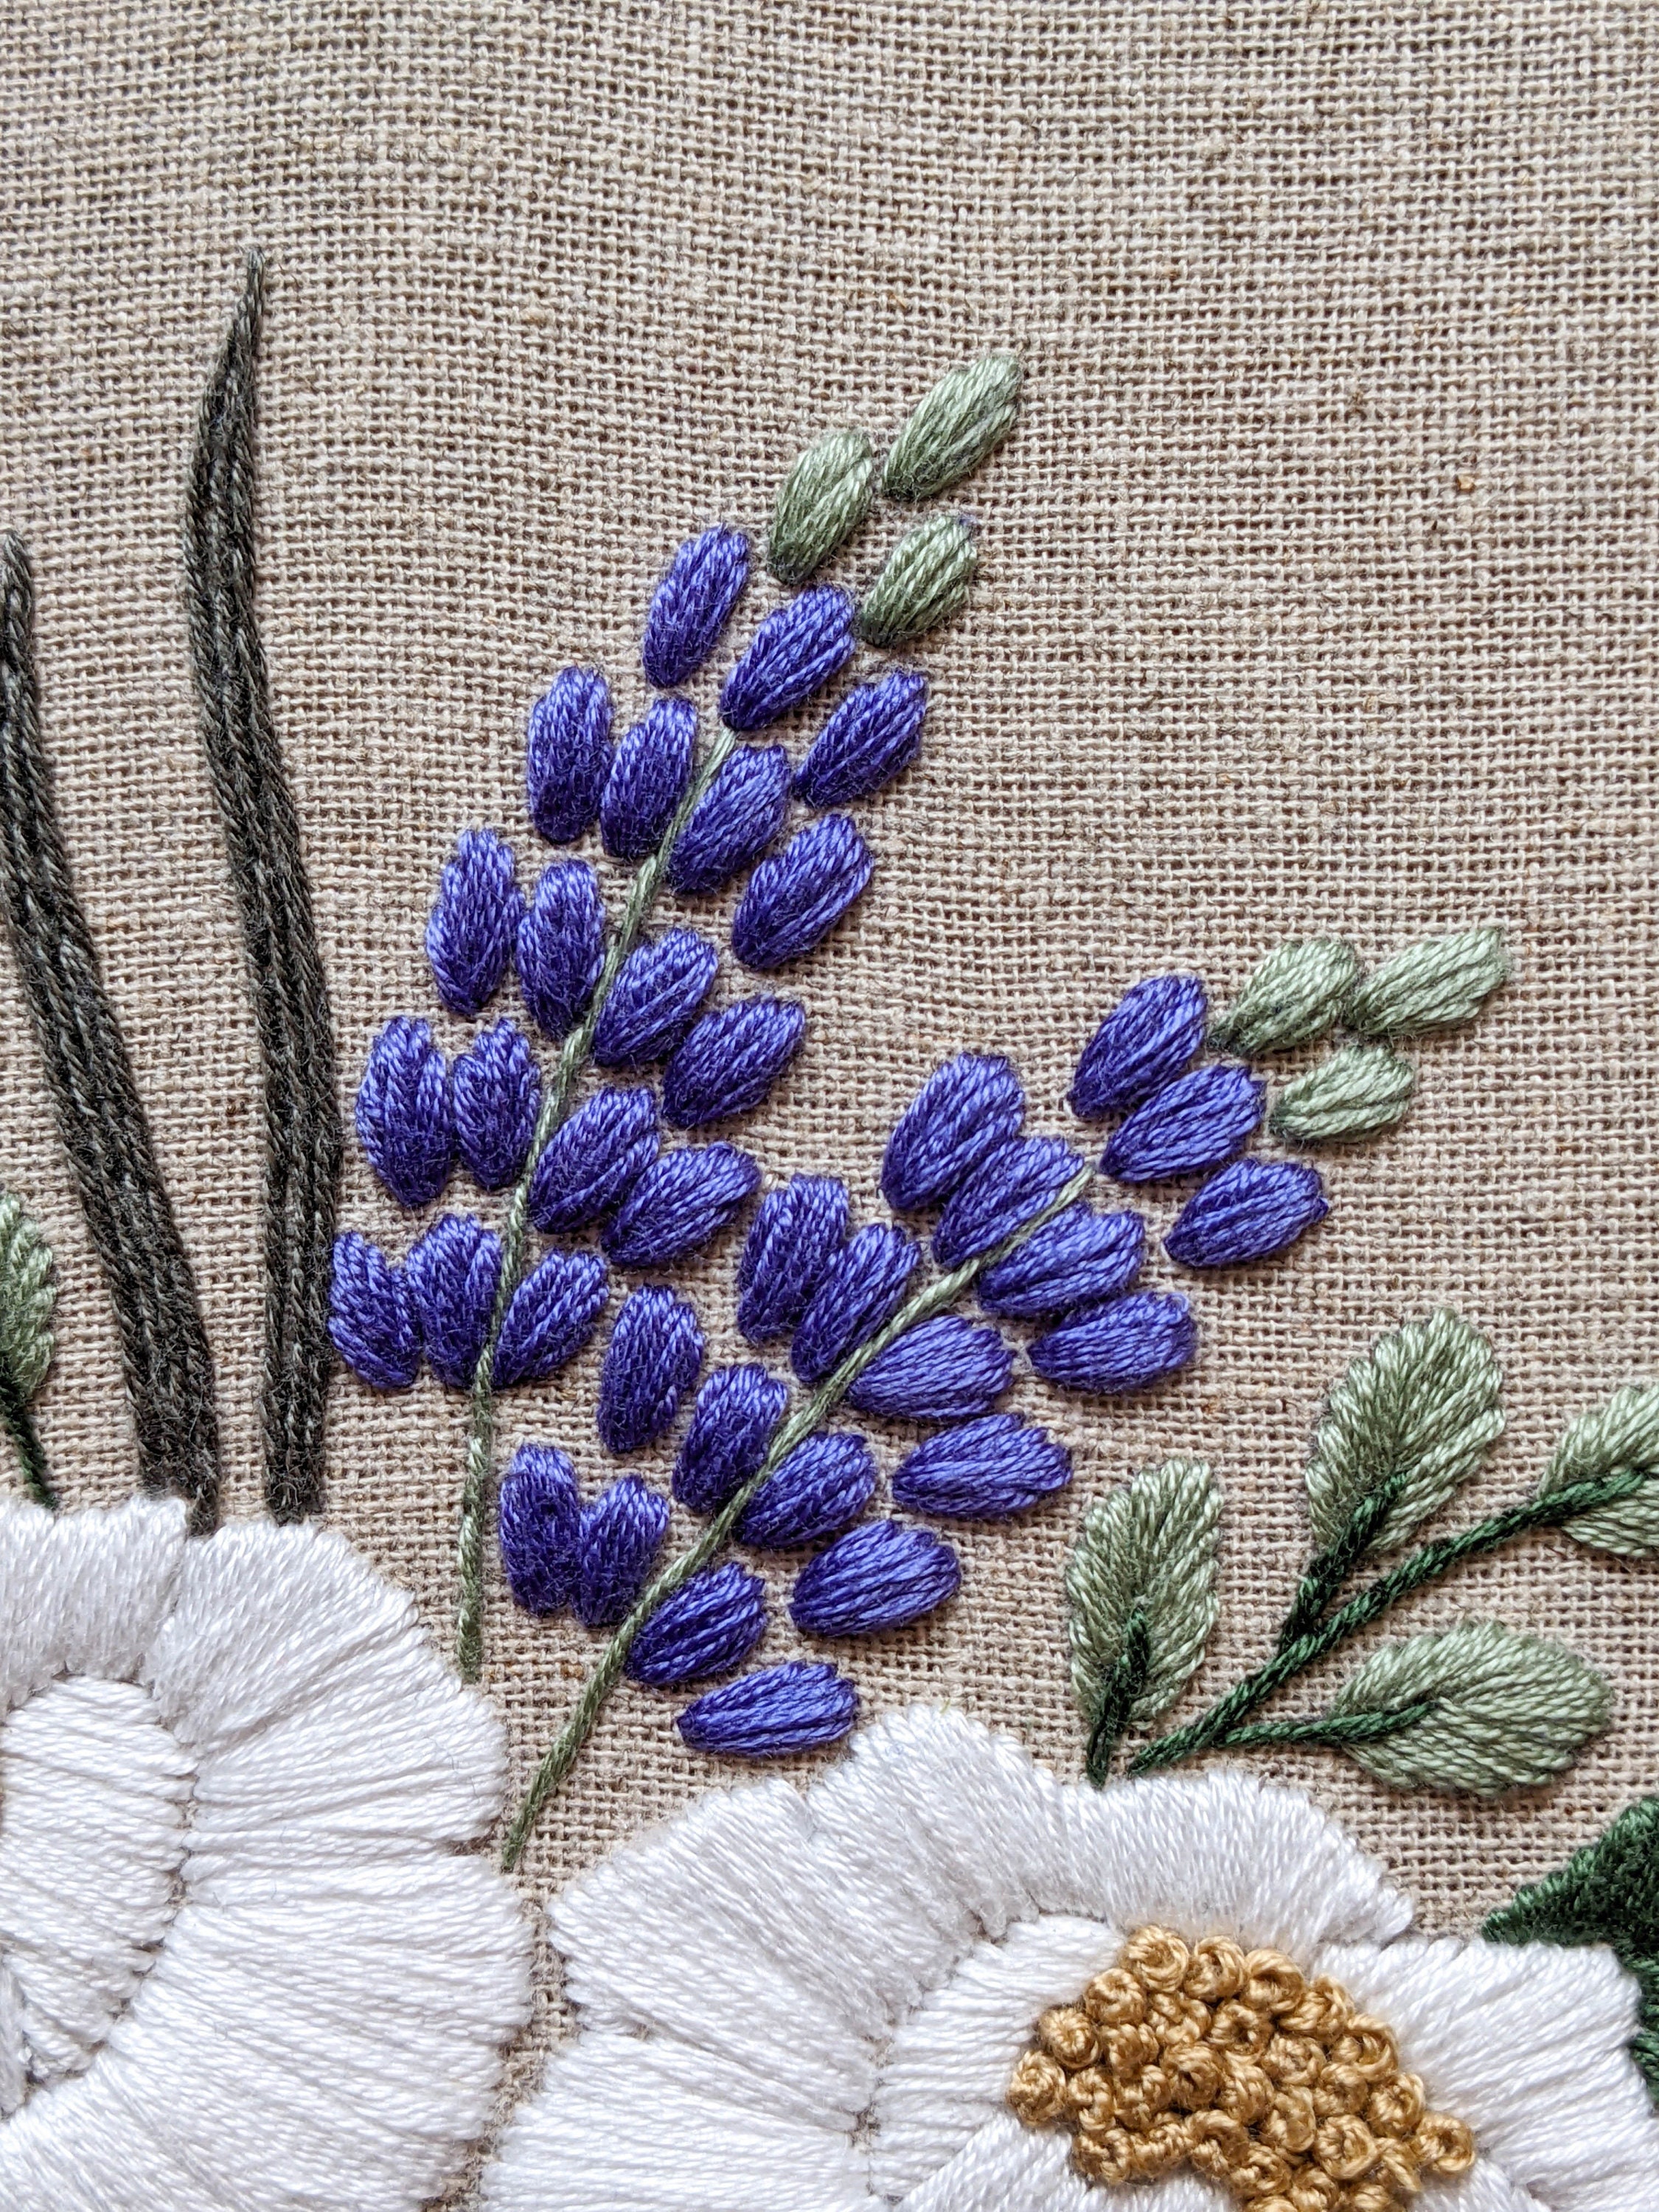 Stick and Stitch Botanical Embroidery Patterns – Sincerely Laura